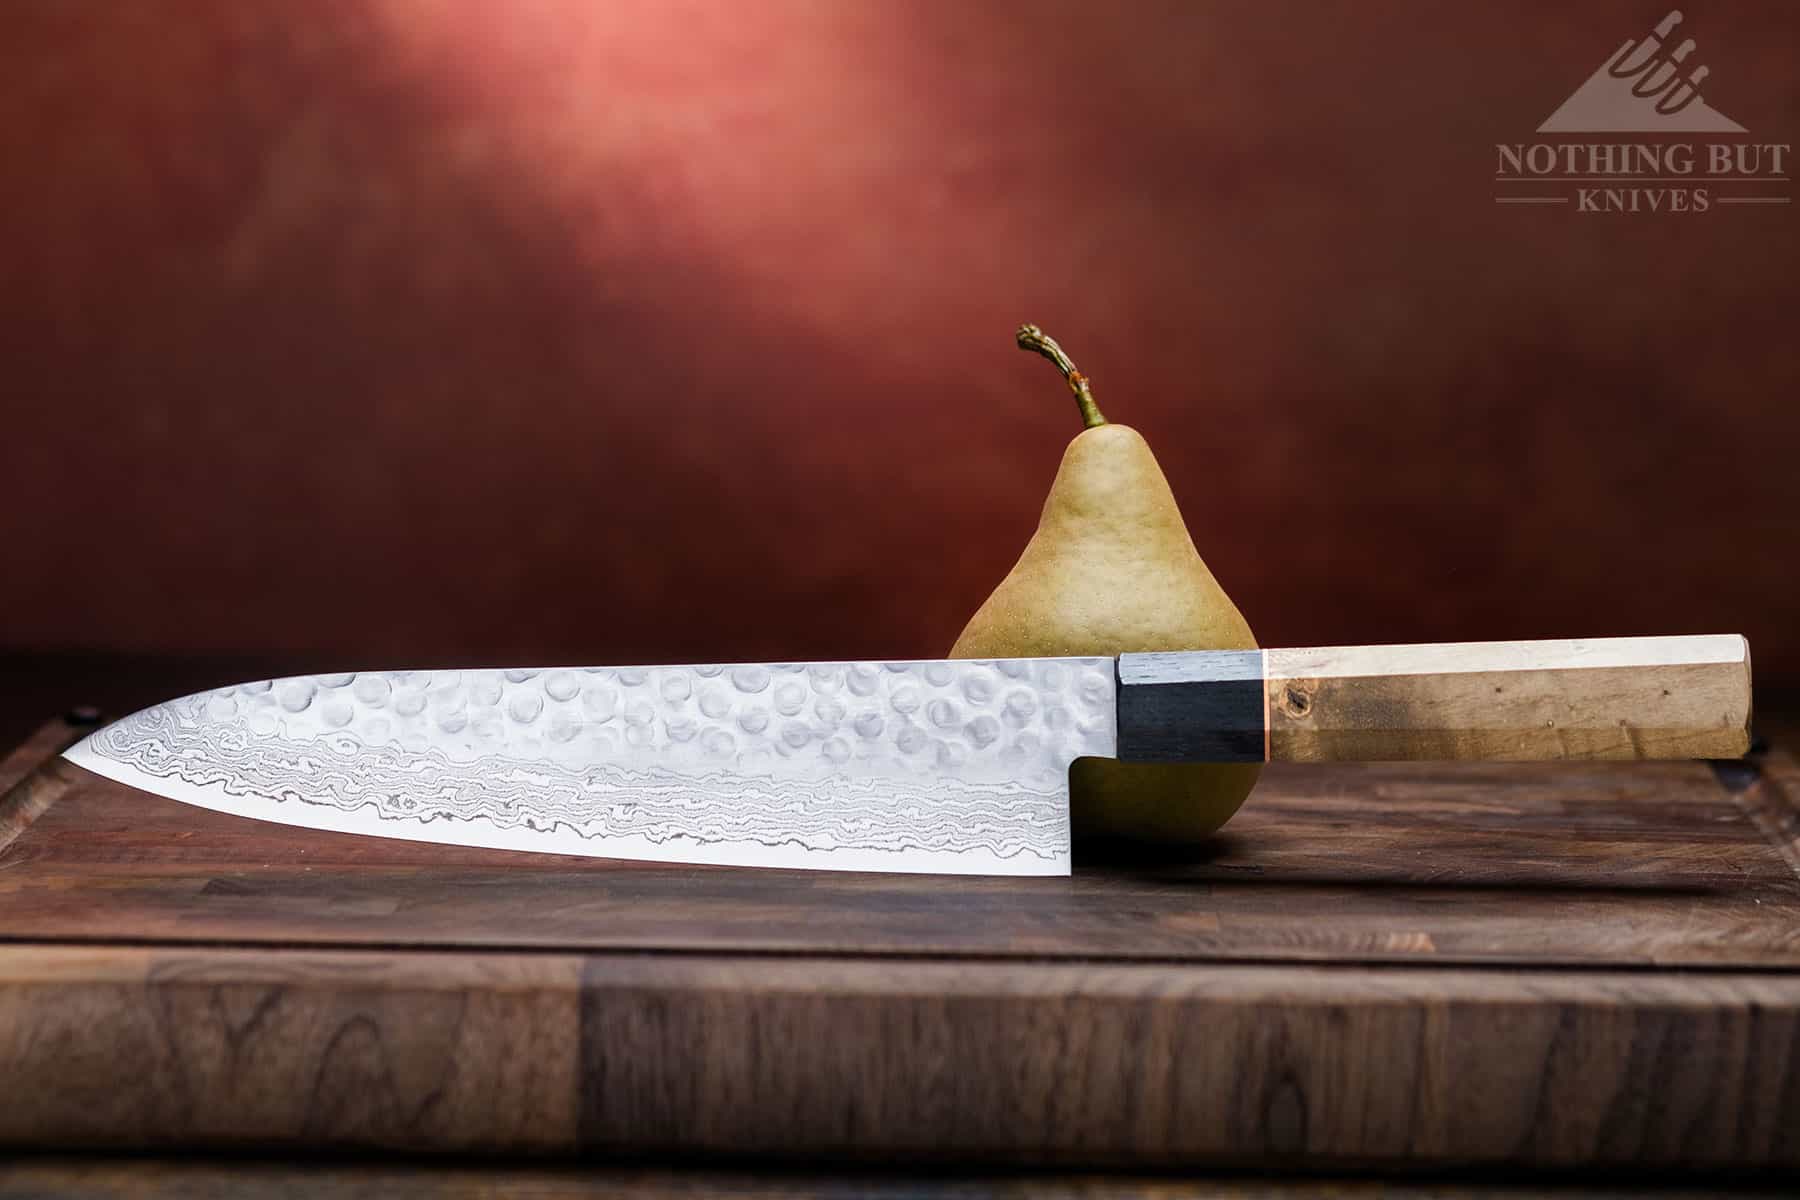 This knife is better than a lot of the mainstream choices, and it is more readily available than some of the lesser known  Japanese chef knife options.